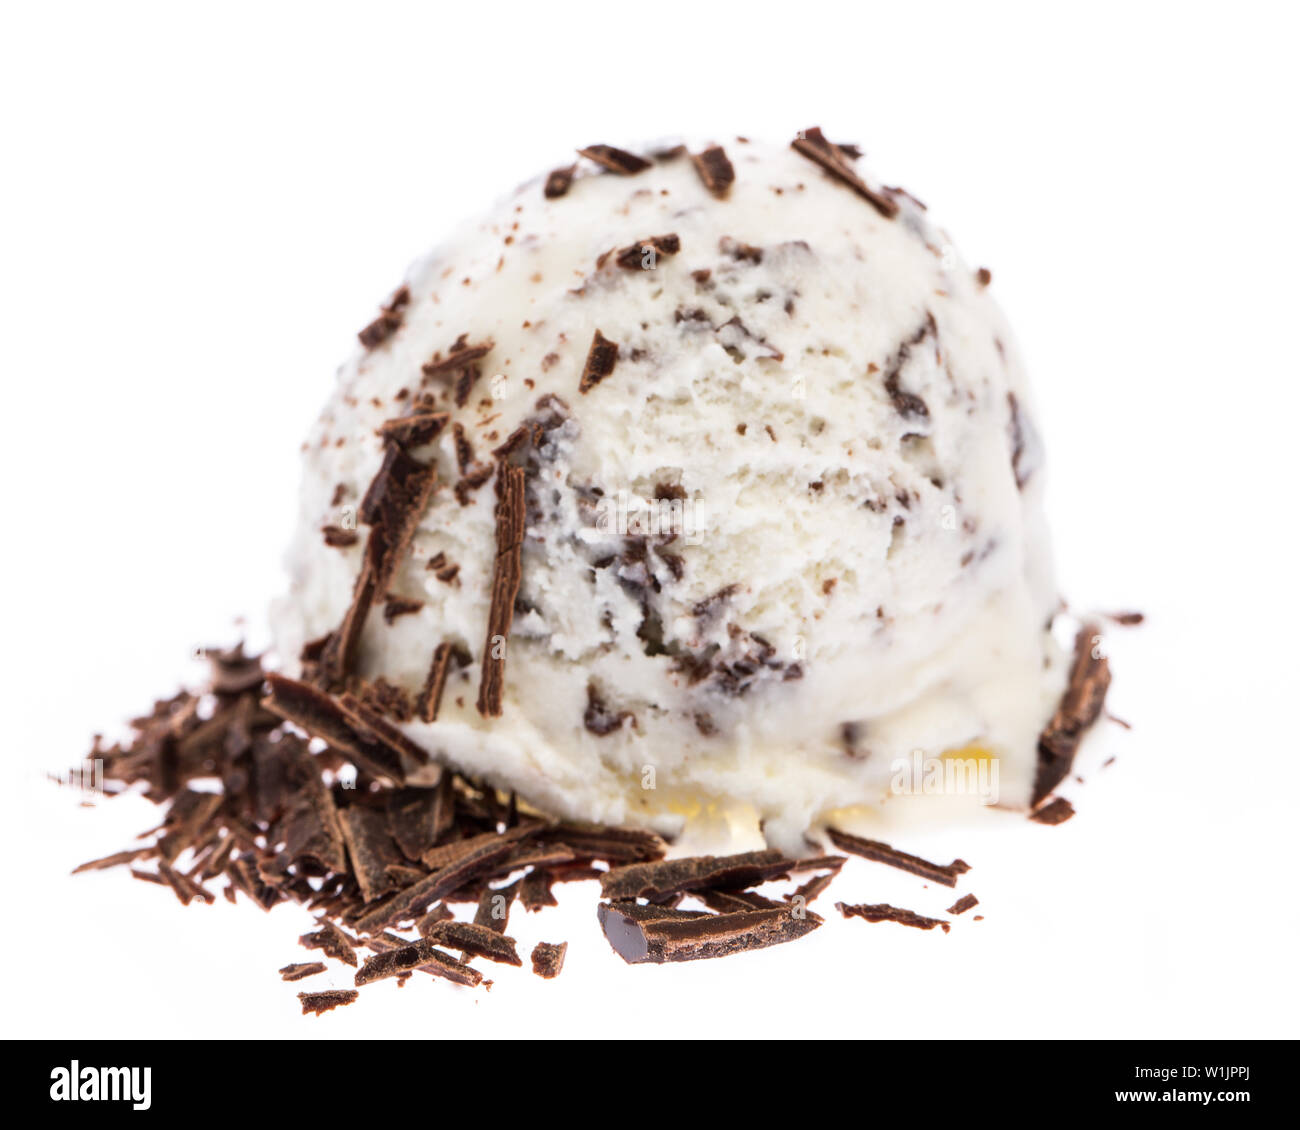 https://c8.alamy.com/comp/W1JPPJ/a-scoop-of-stracciatella-ice-cream-topped-with-chocolate-chips-isoalted-on-white-background-W1JPPJ.jpg